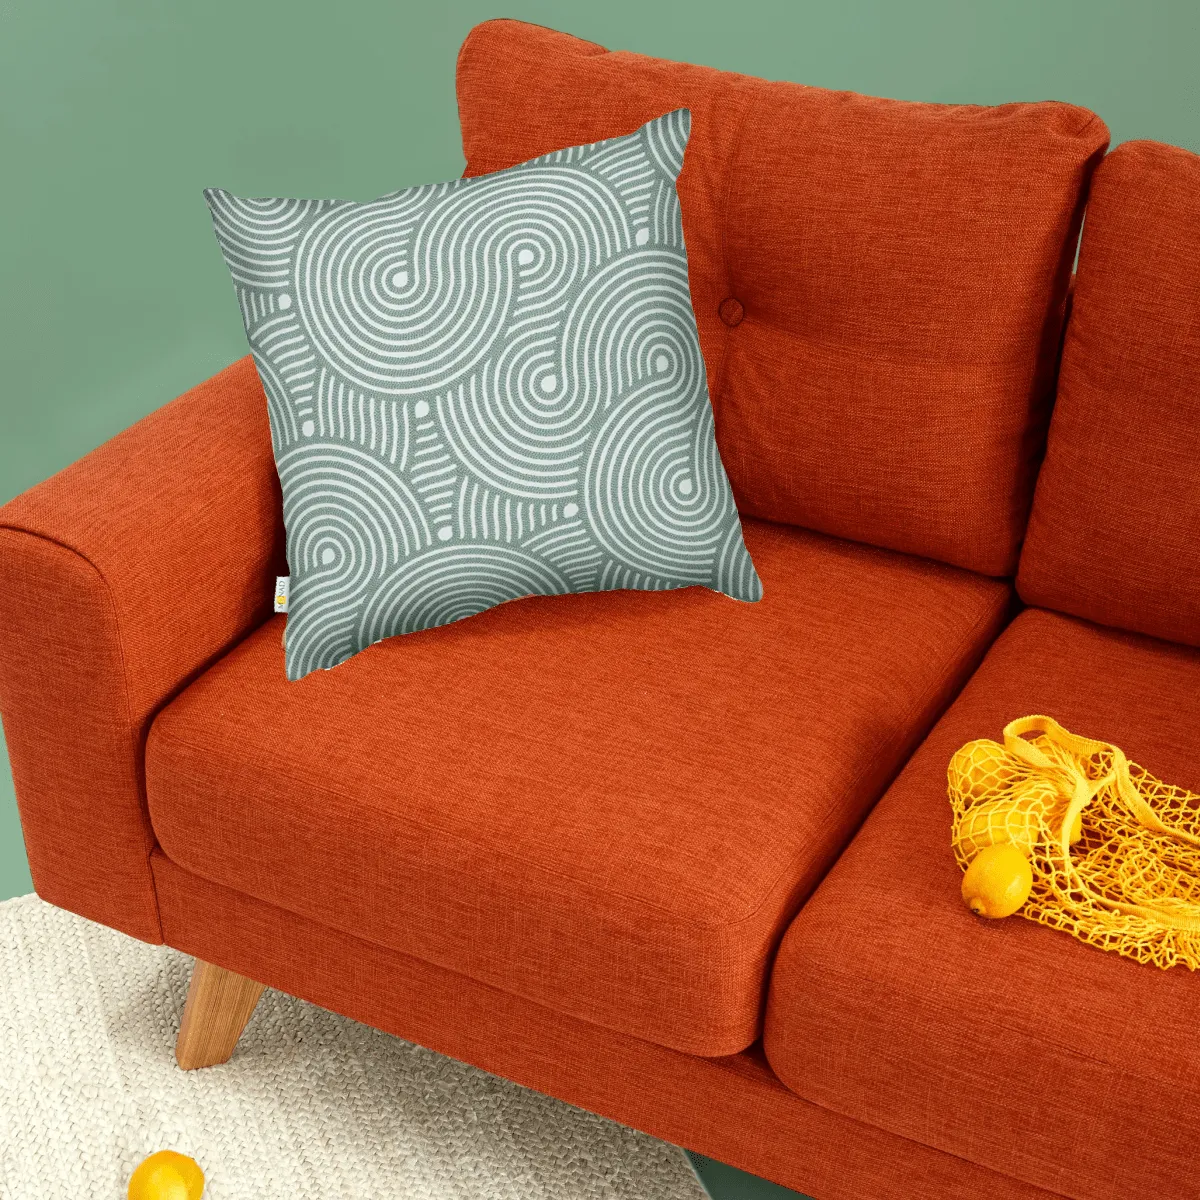 Yellow Swarm Pattern Embroidered Cushion Cover